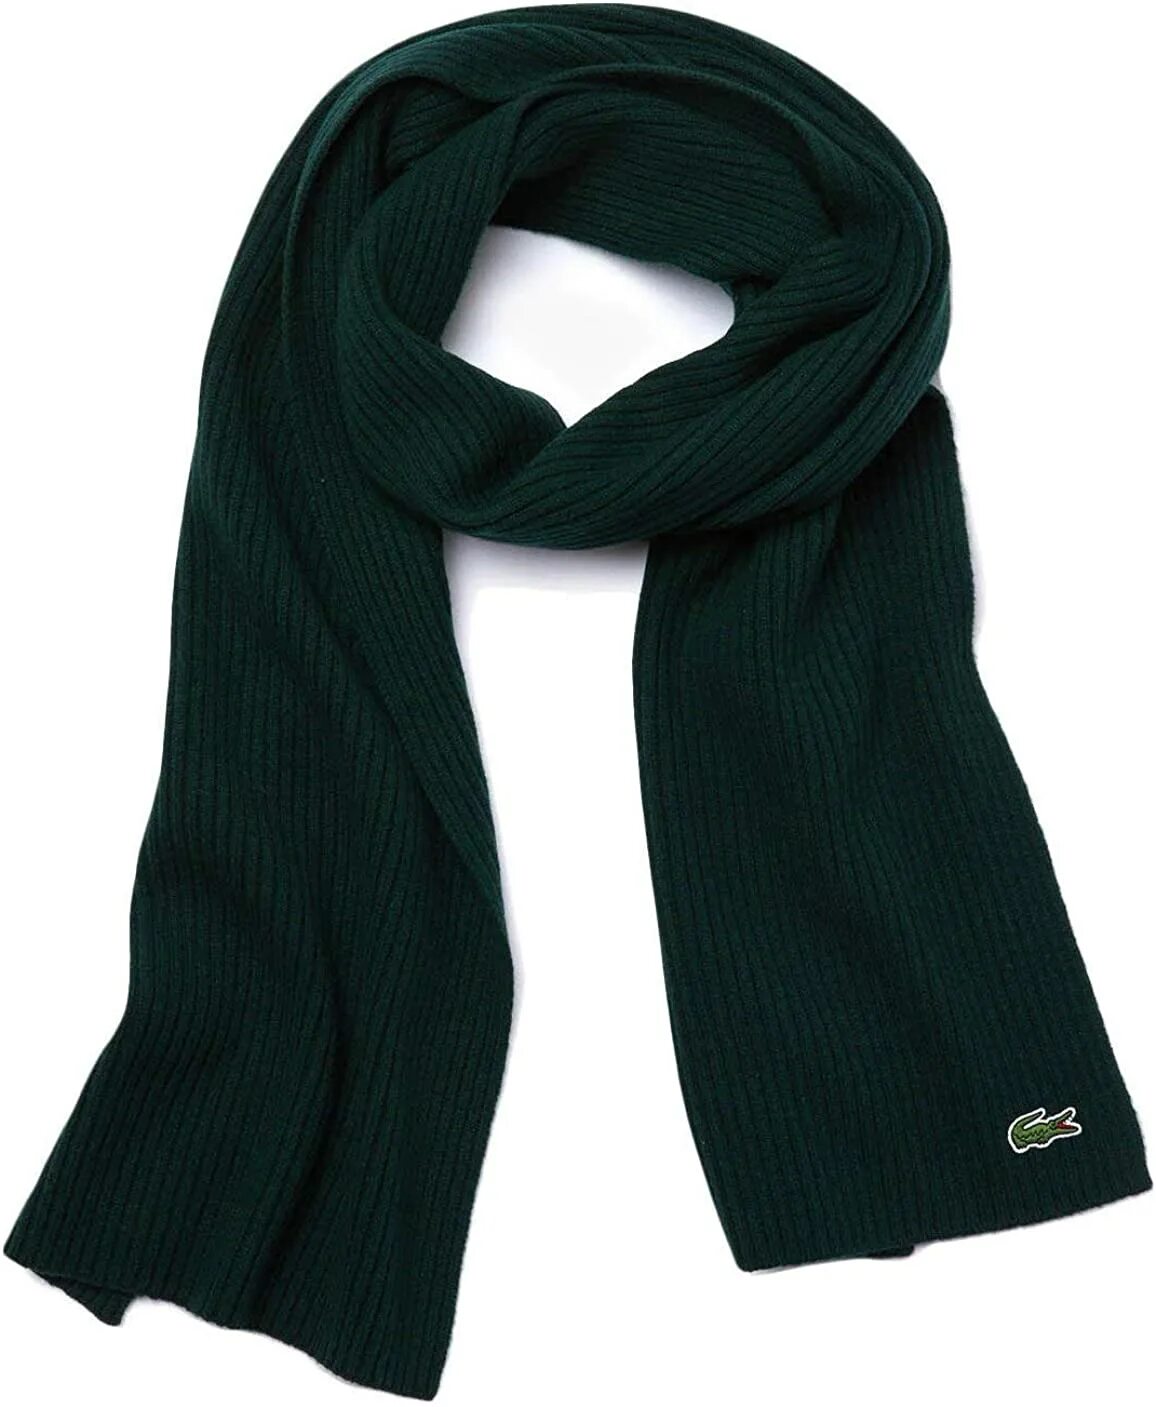 Lacoste Scarf re6101. Lacoste кашне. Шарф лакоста. Лакост Live шарф.